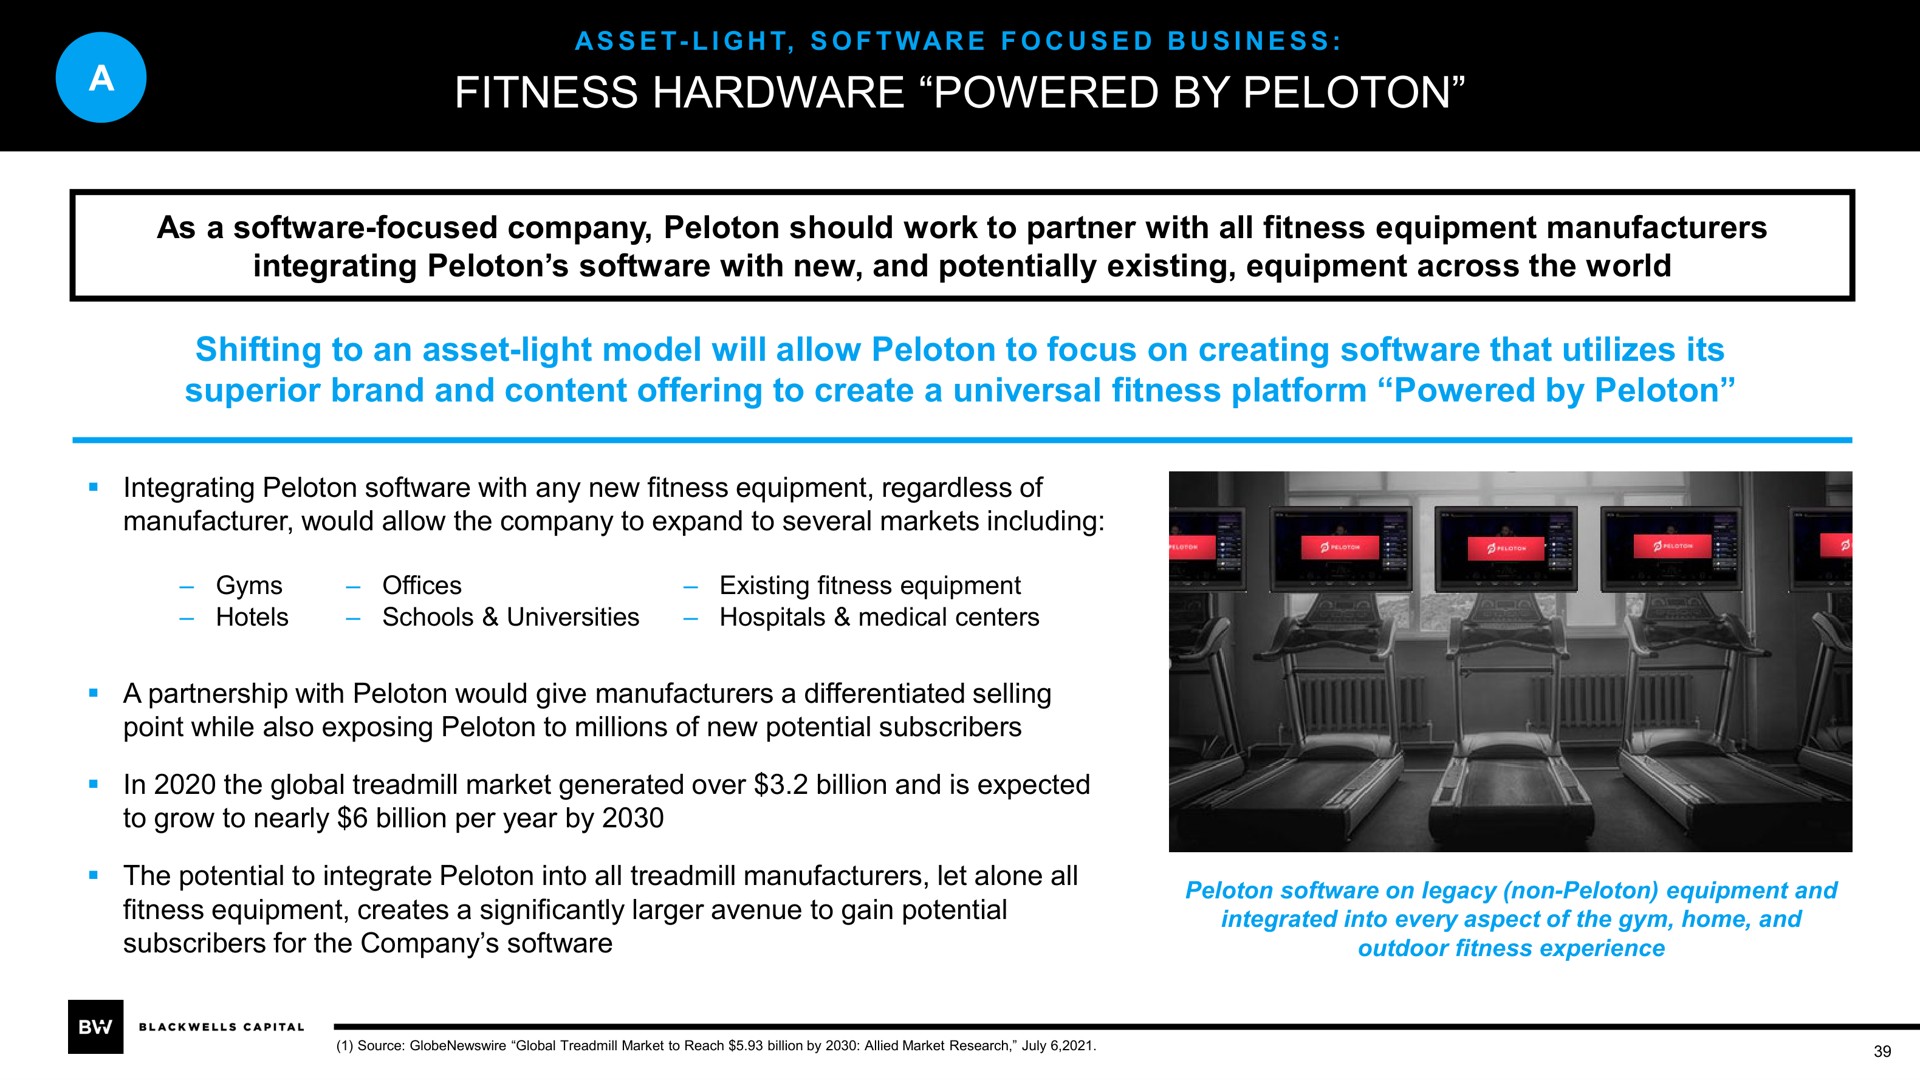 a fitness hardware powered by peloton | Blackwells Capital